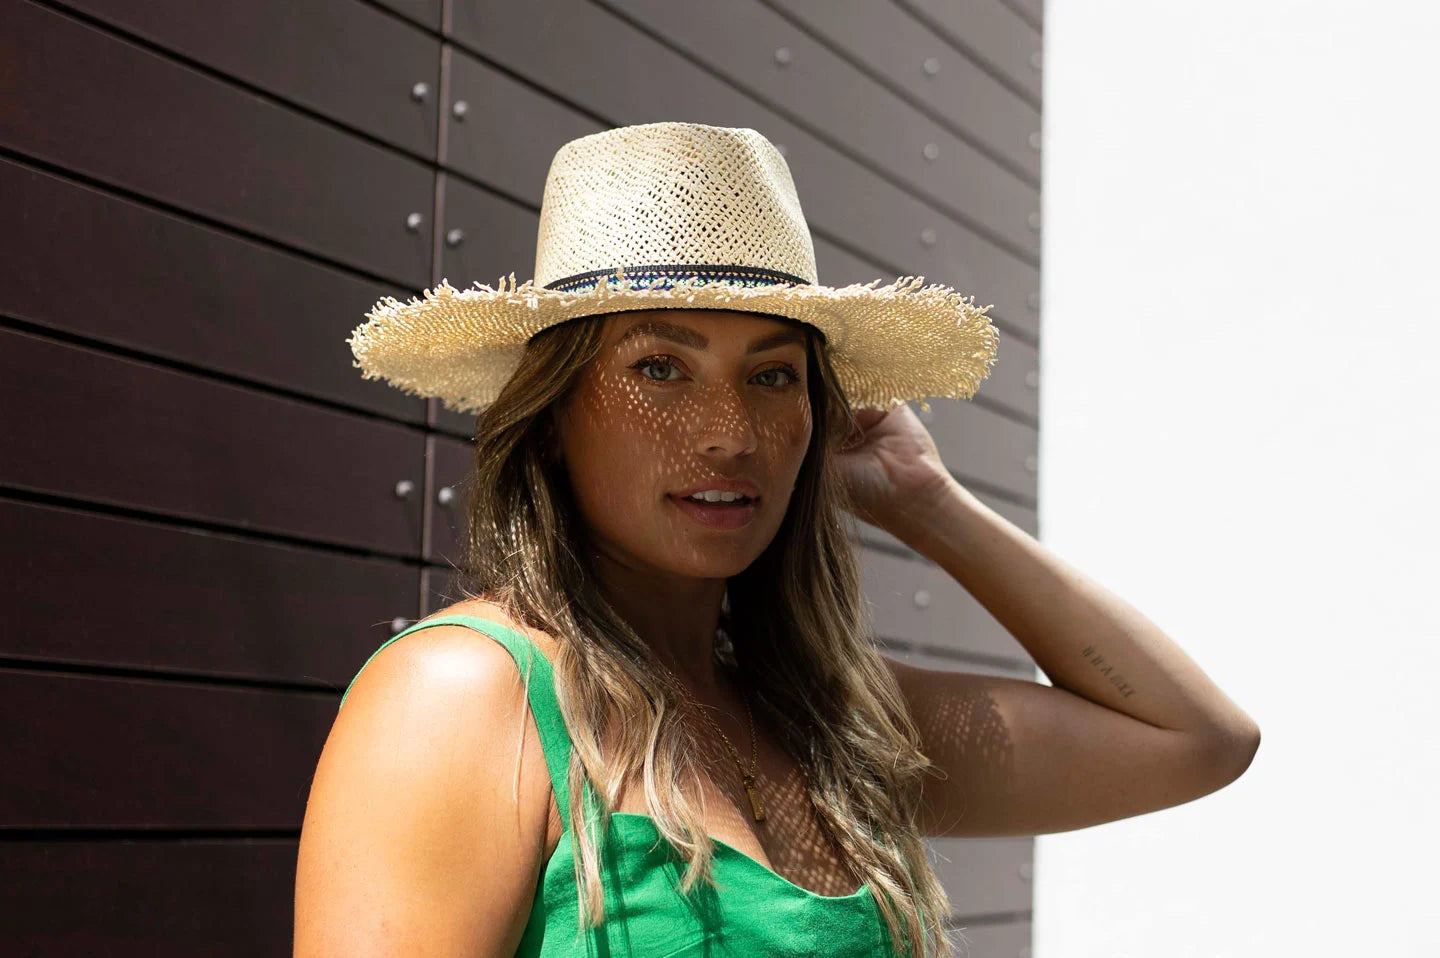 A woman in a green top wearing a straw sun hat